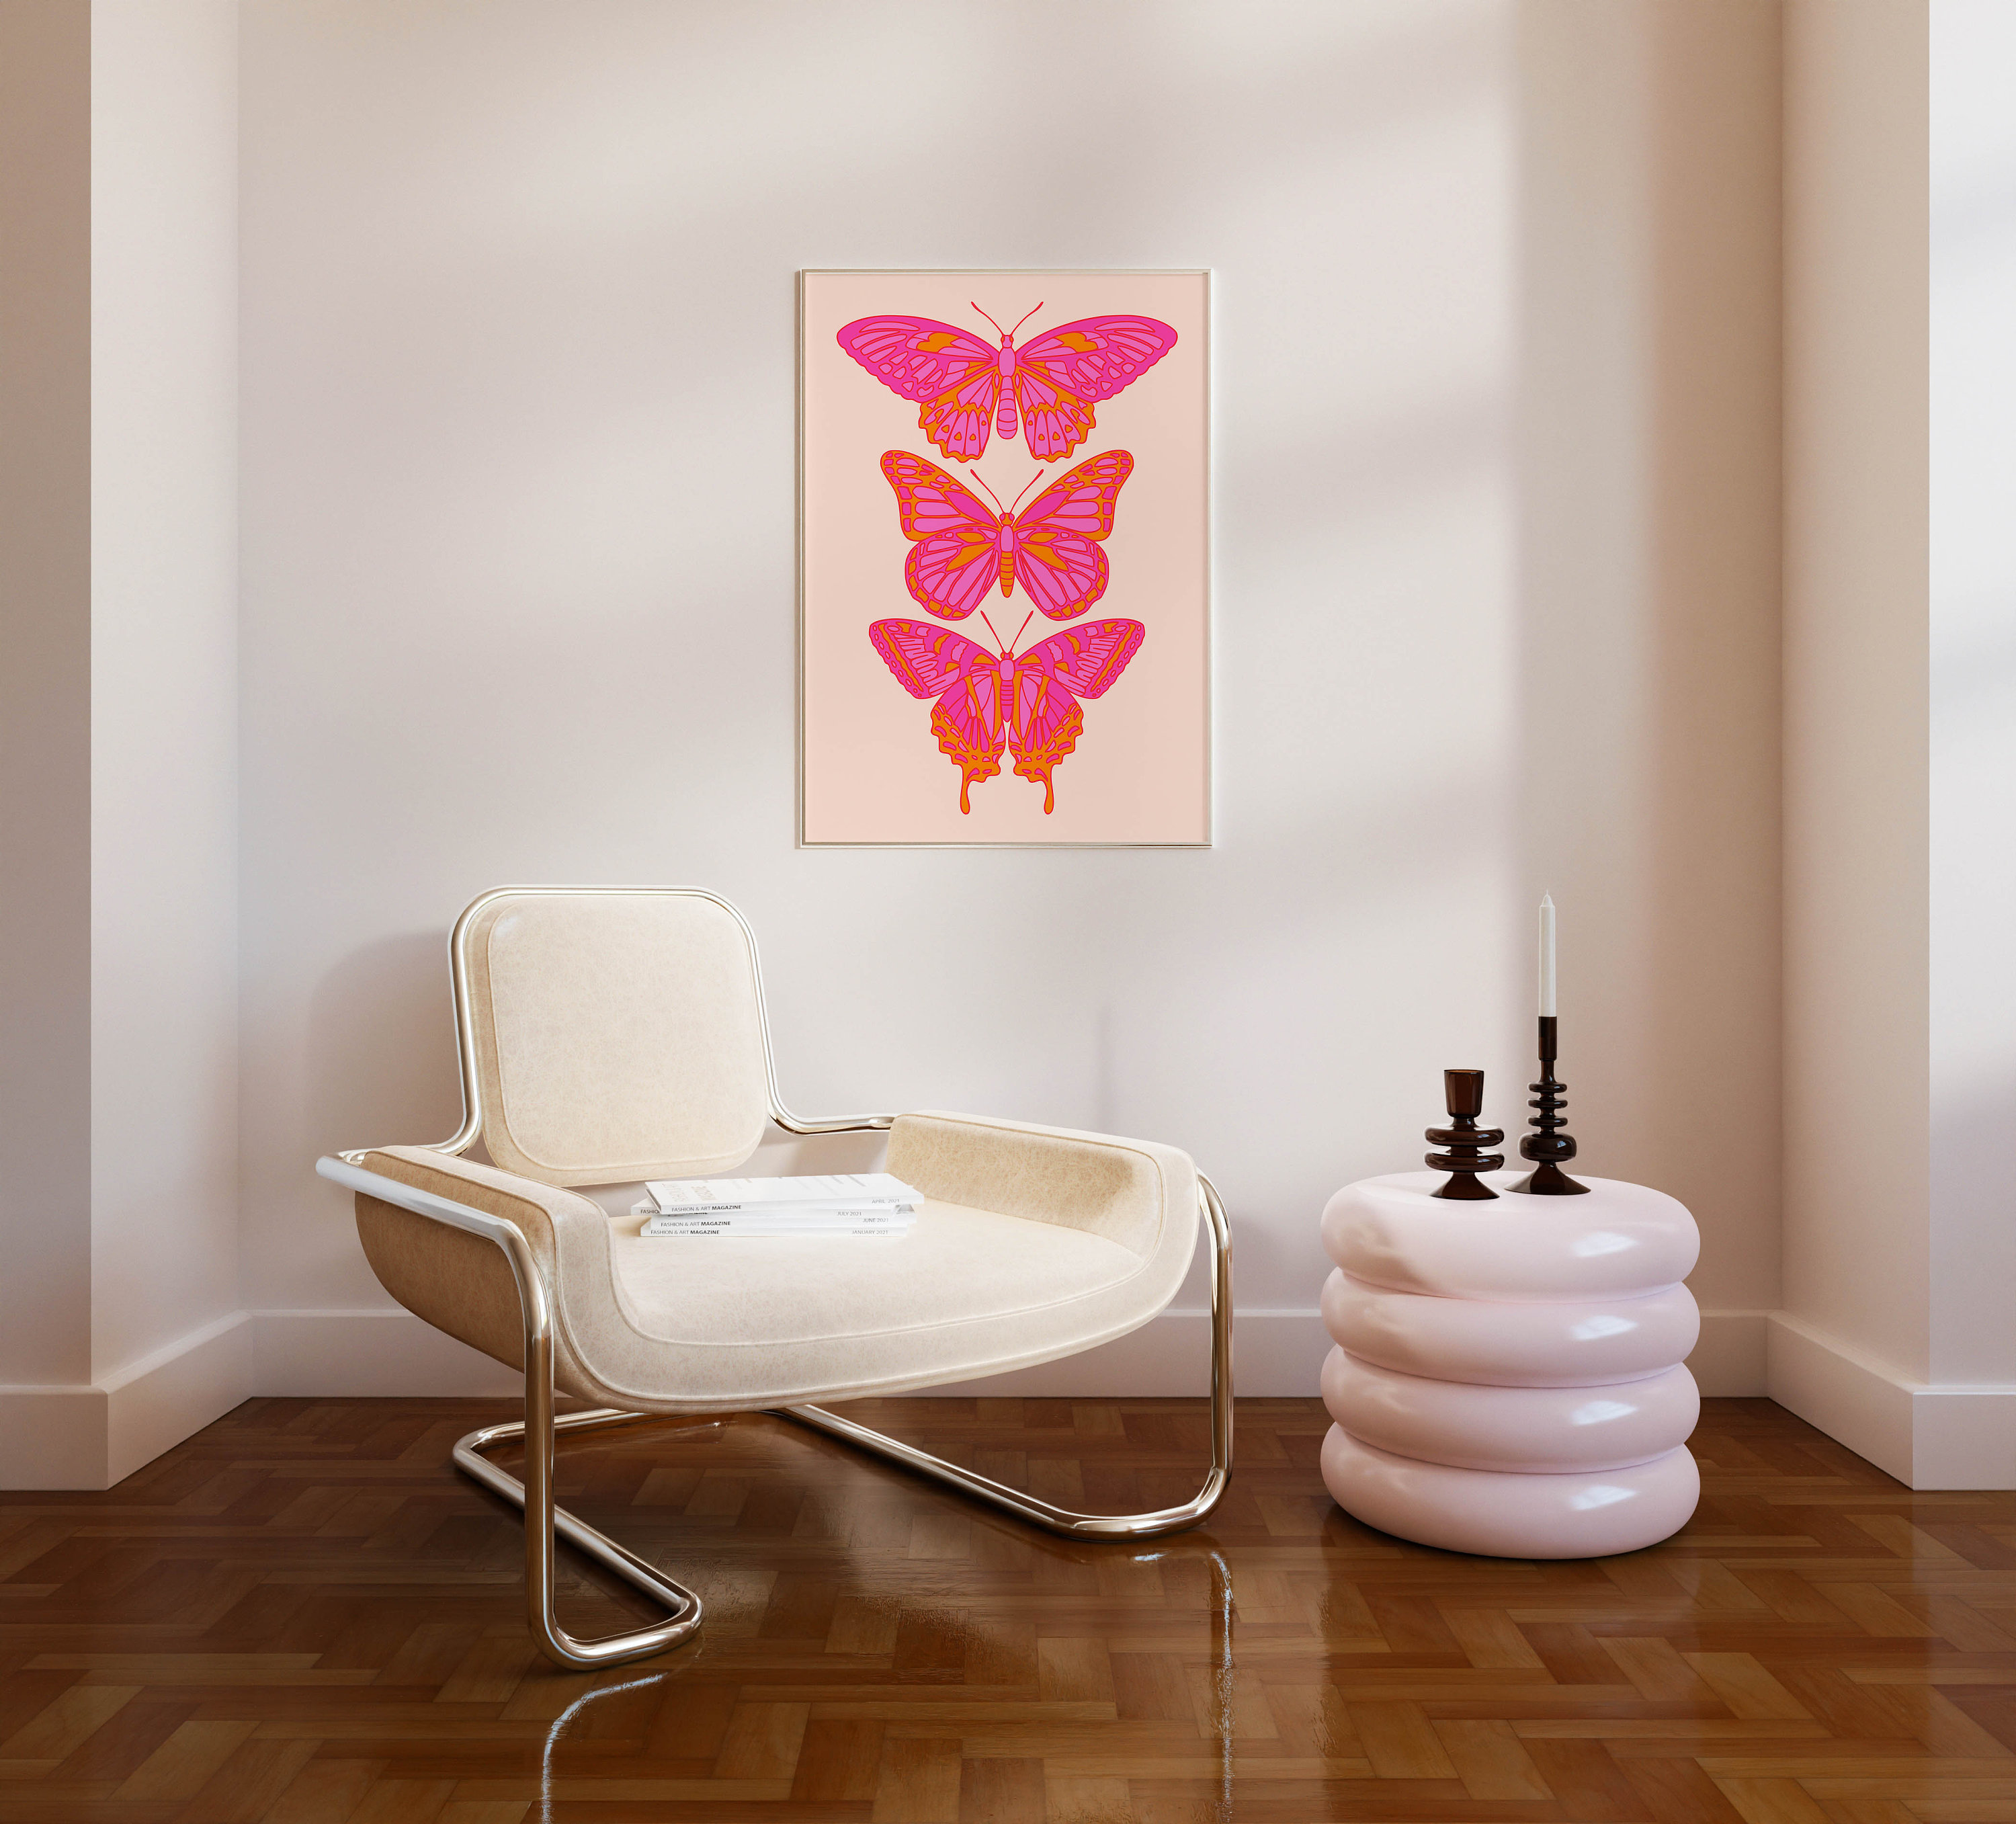 ytreyoimro Funky Pink Orange Butterfly Canvas Wall Art, Trendy Preppy Butterflies Poster for Girls Bedroom, Cute College Dorm Apartment Wall Decor